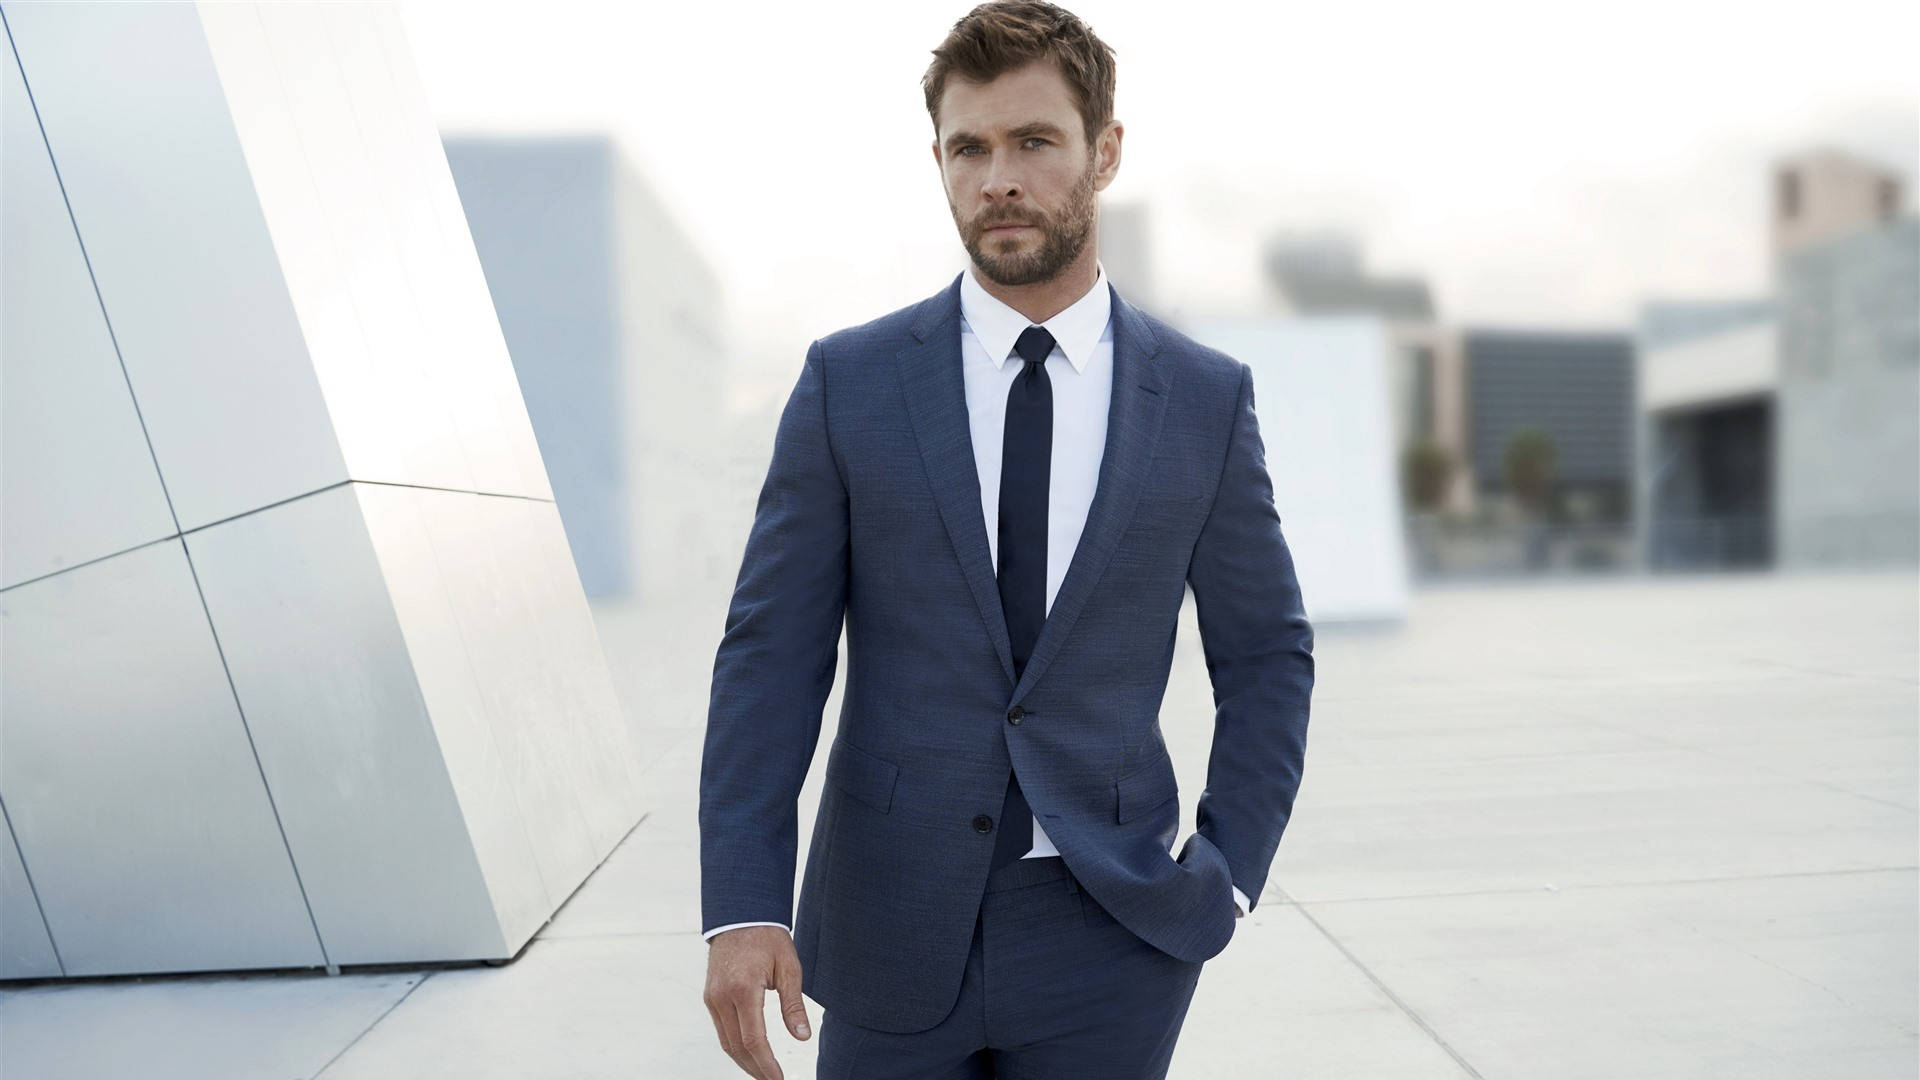 Chris Hemsworth looks confident and powerful in a suit. Wallpaper